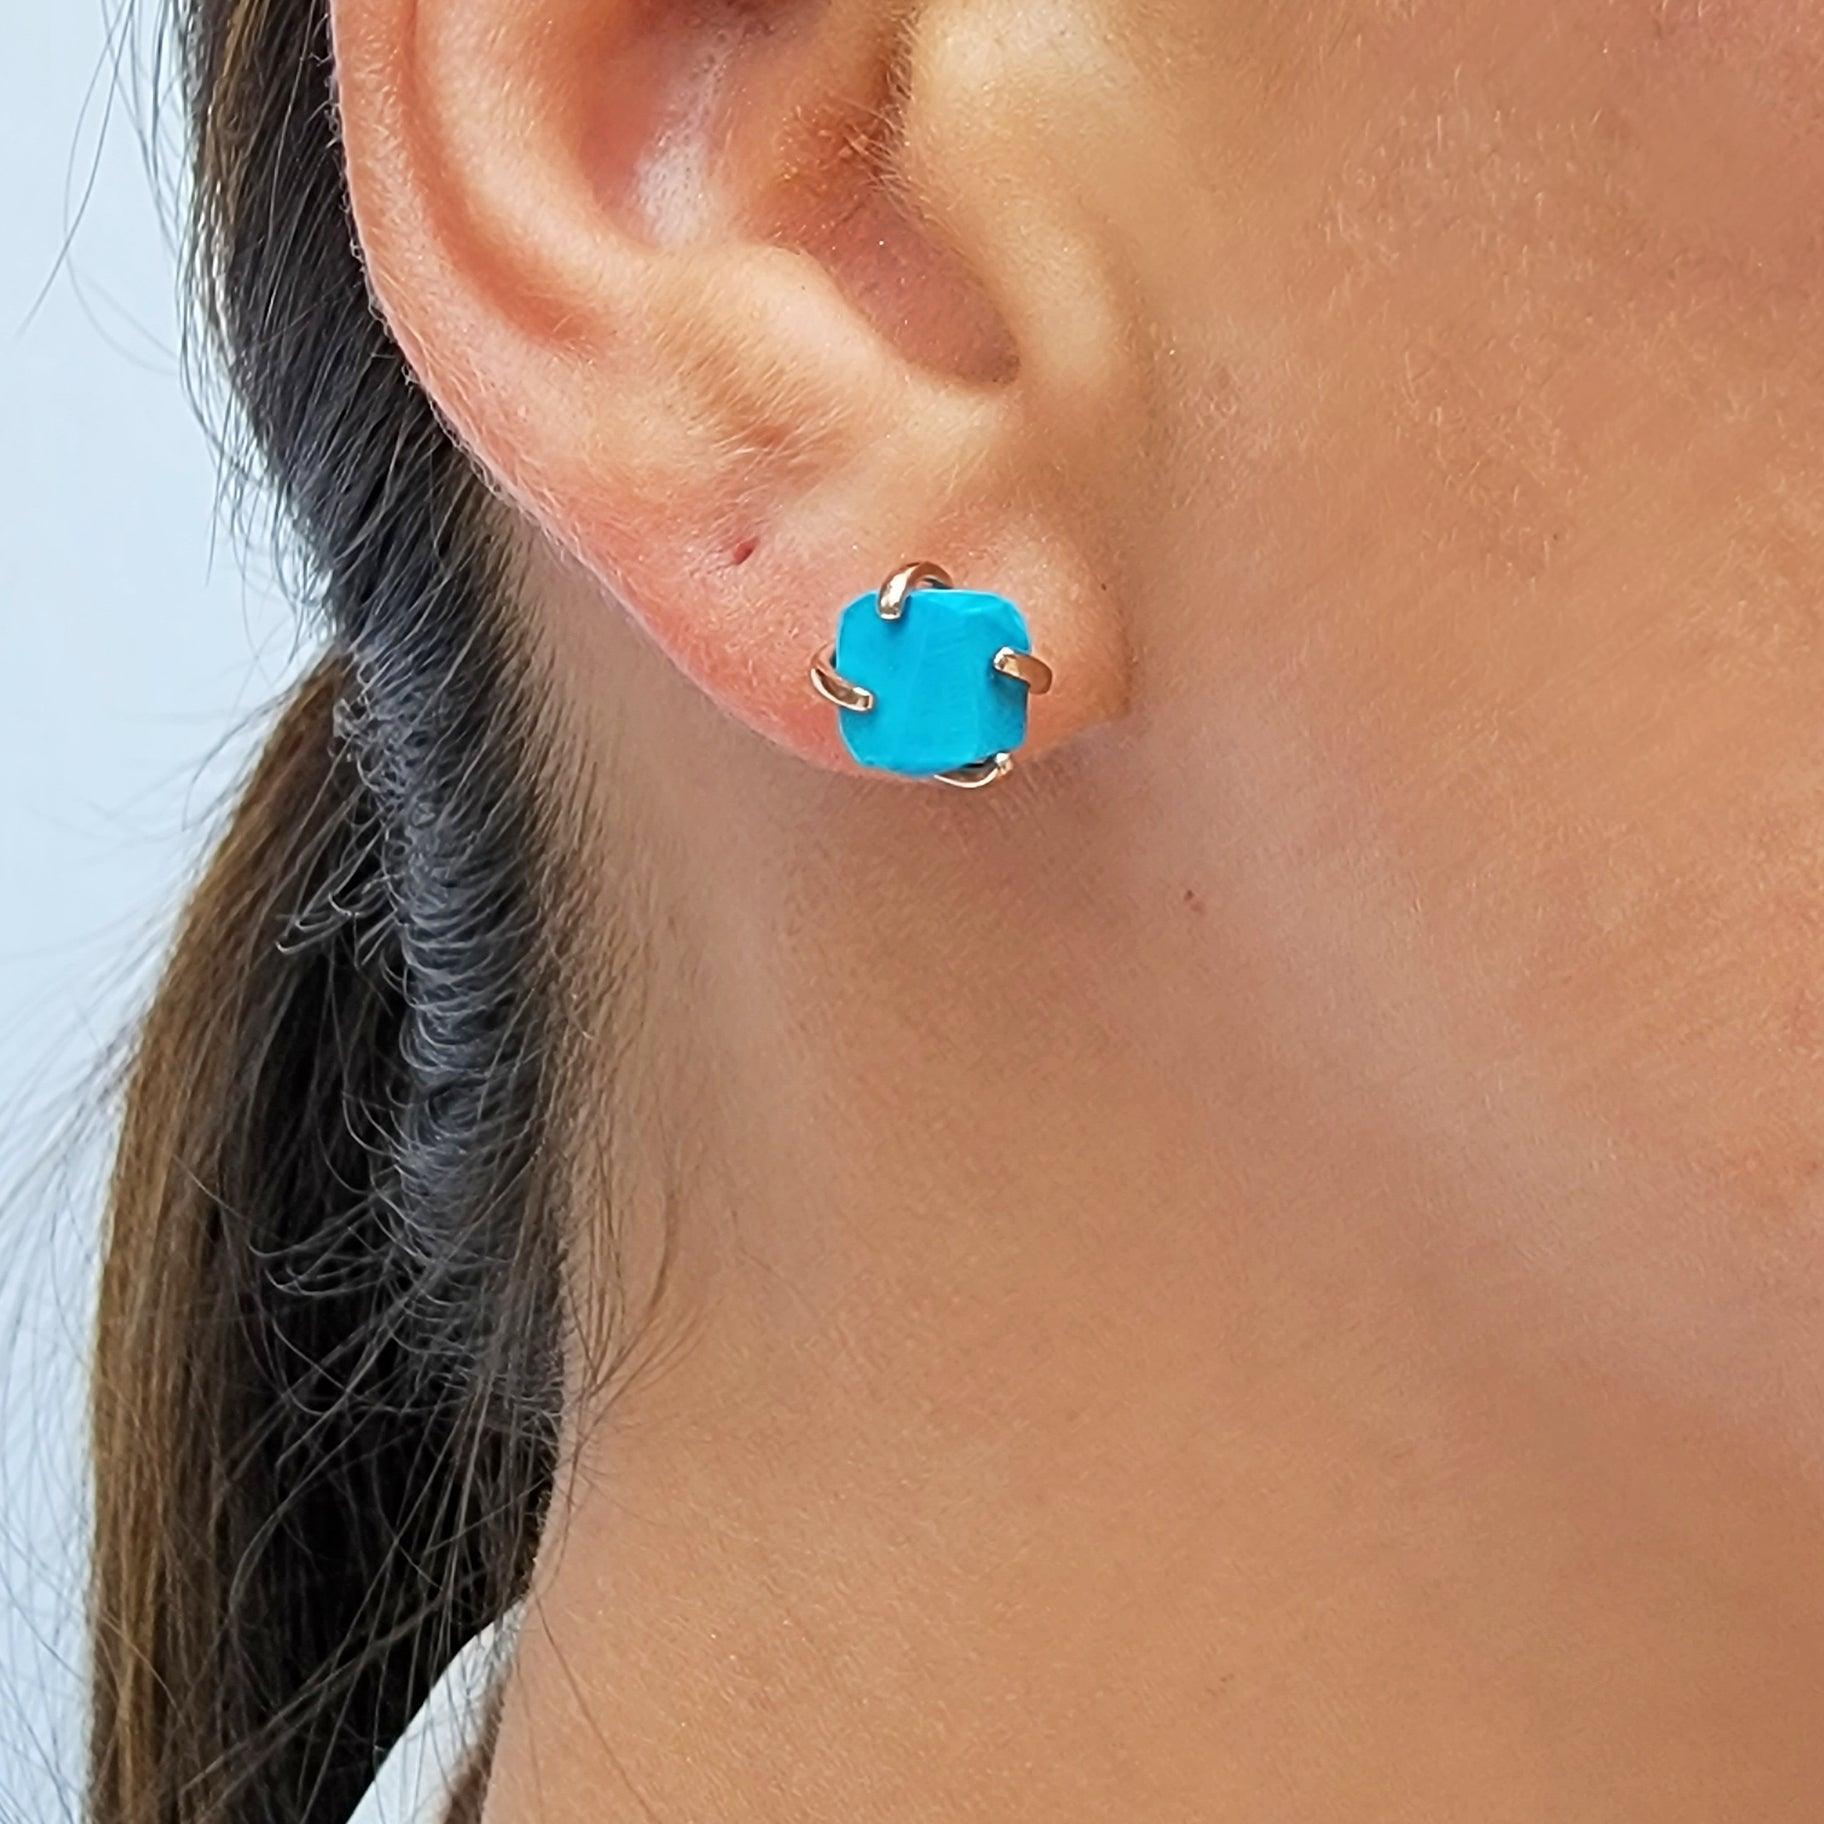 Turquoise Stud Earrings in 18k gold – Rona Fisher Jewelry